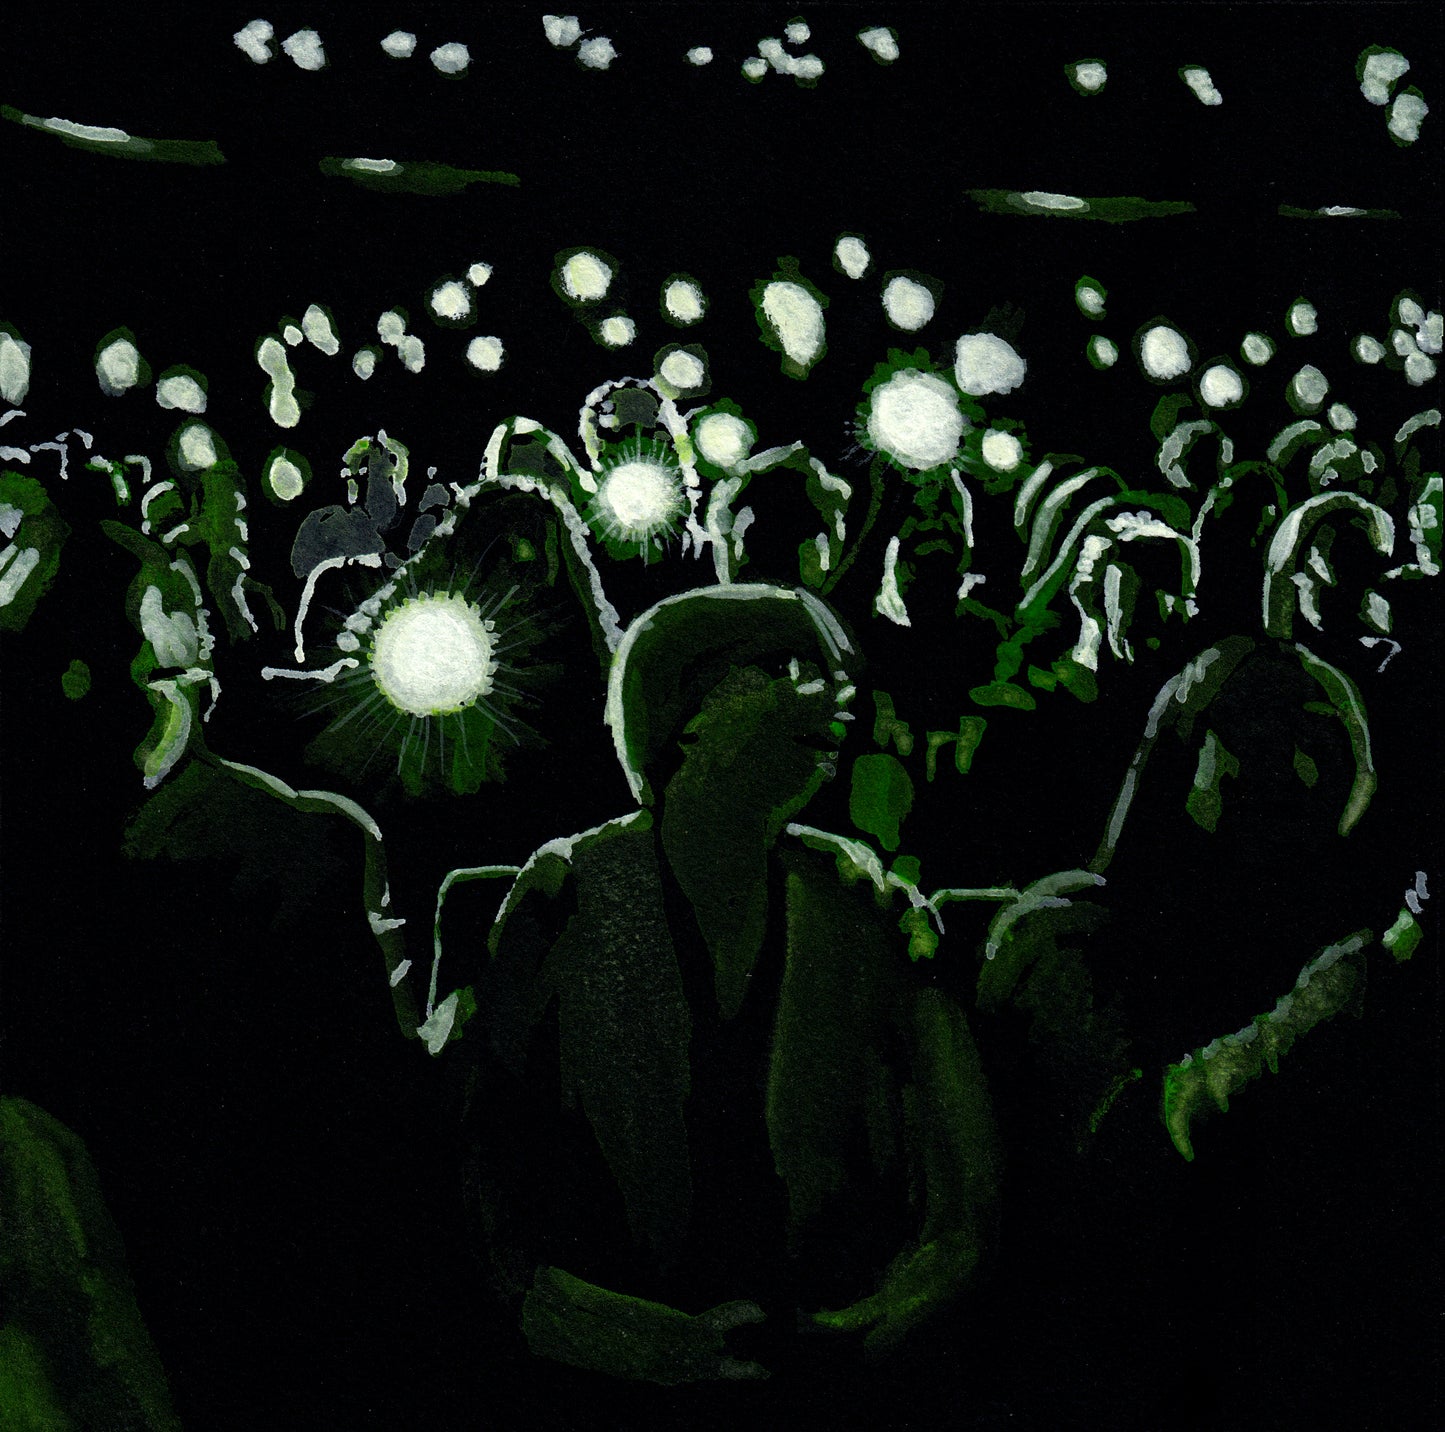 Lights in the Theater, Gouache on Black Paper, Audience, Original Painting